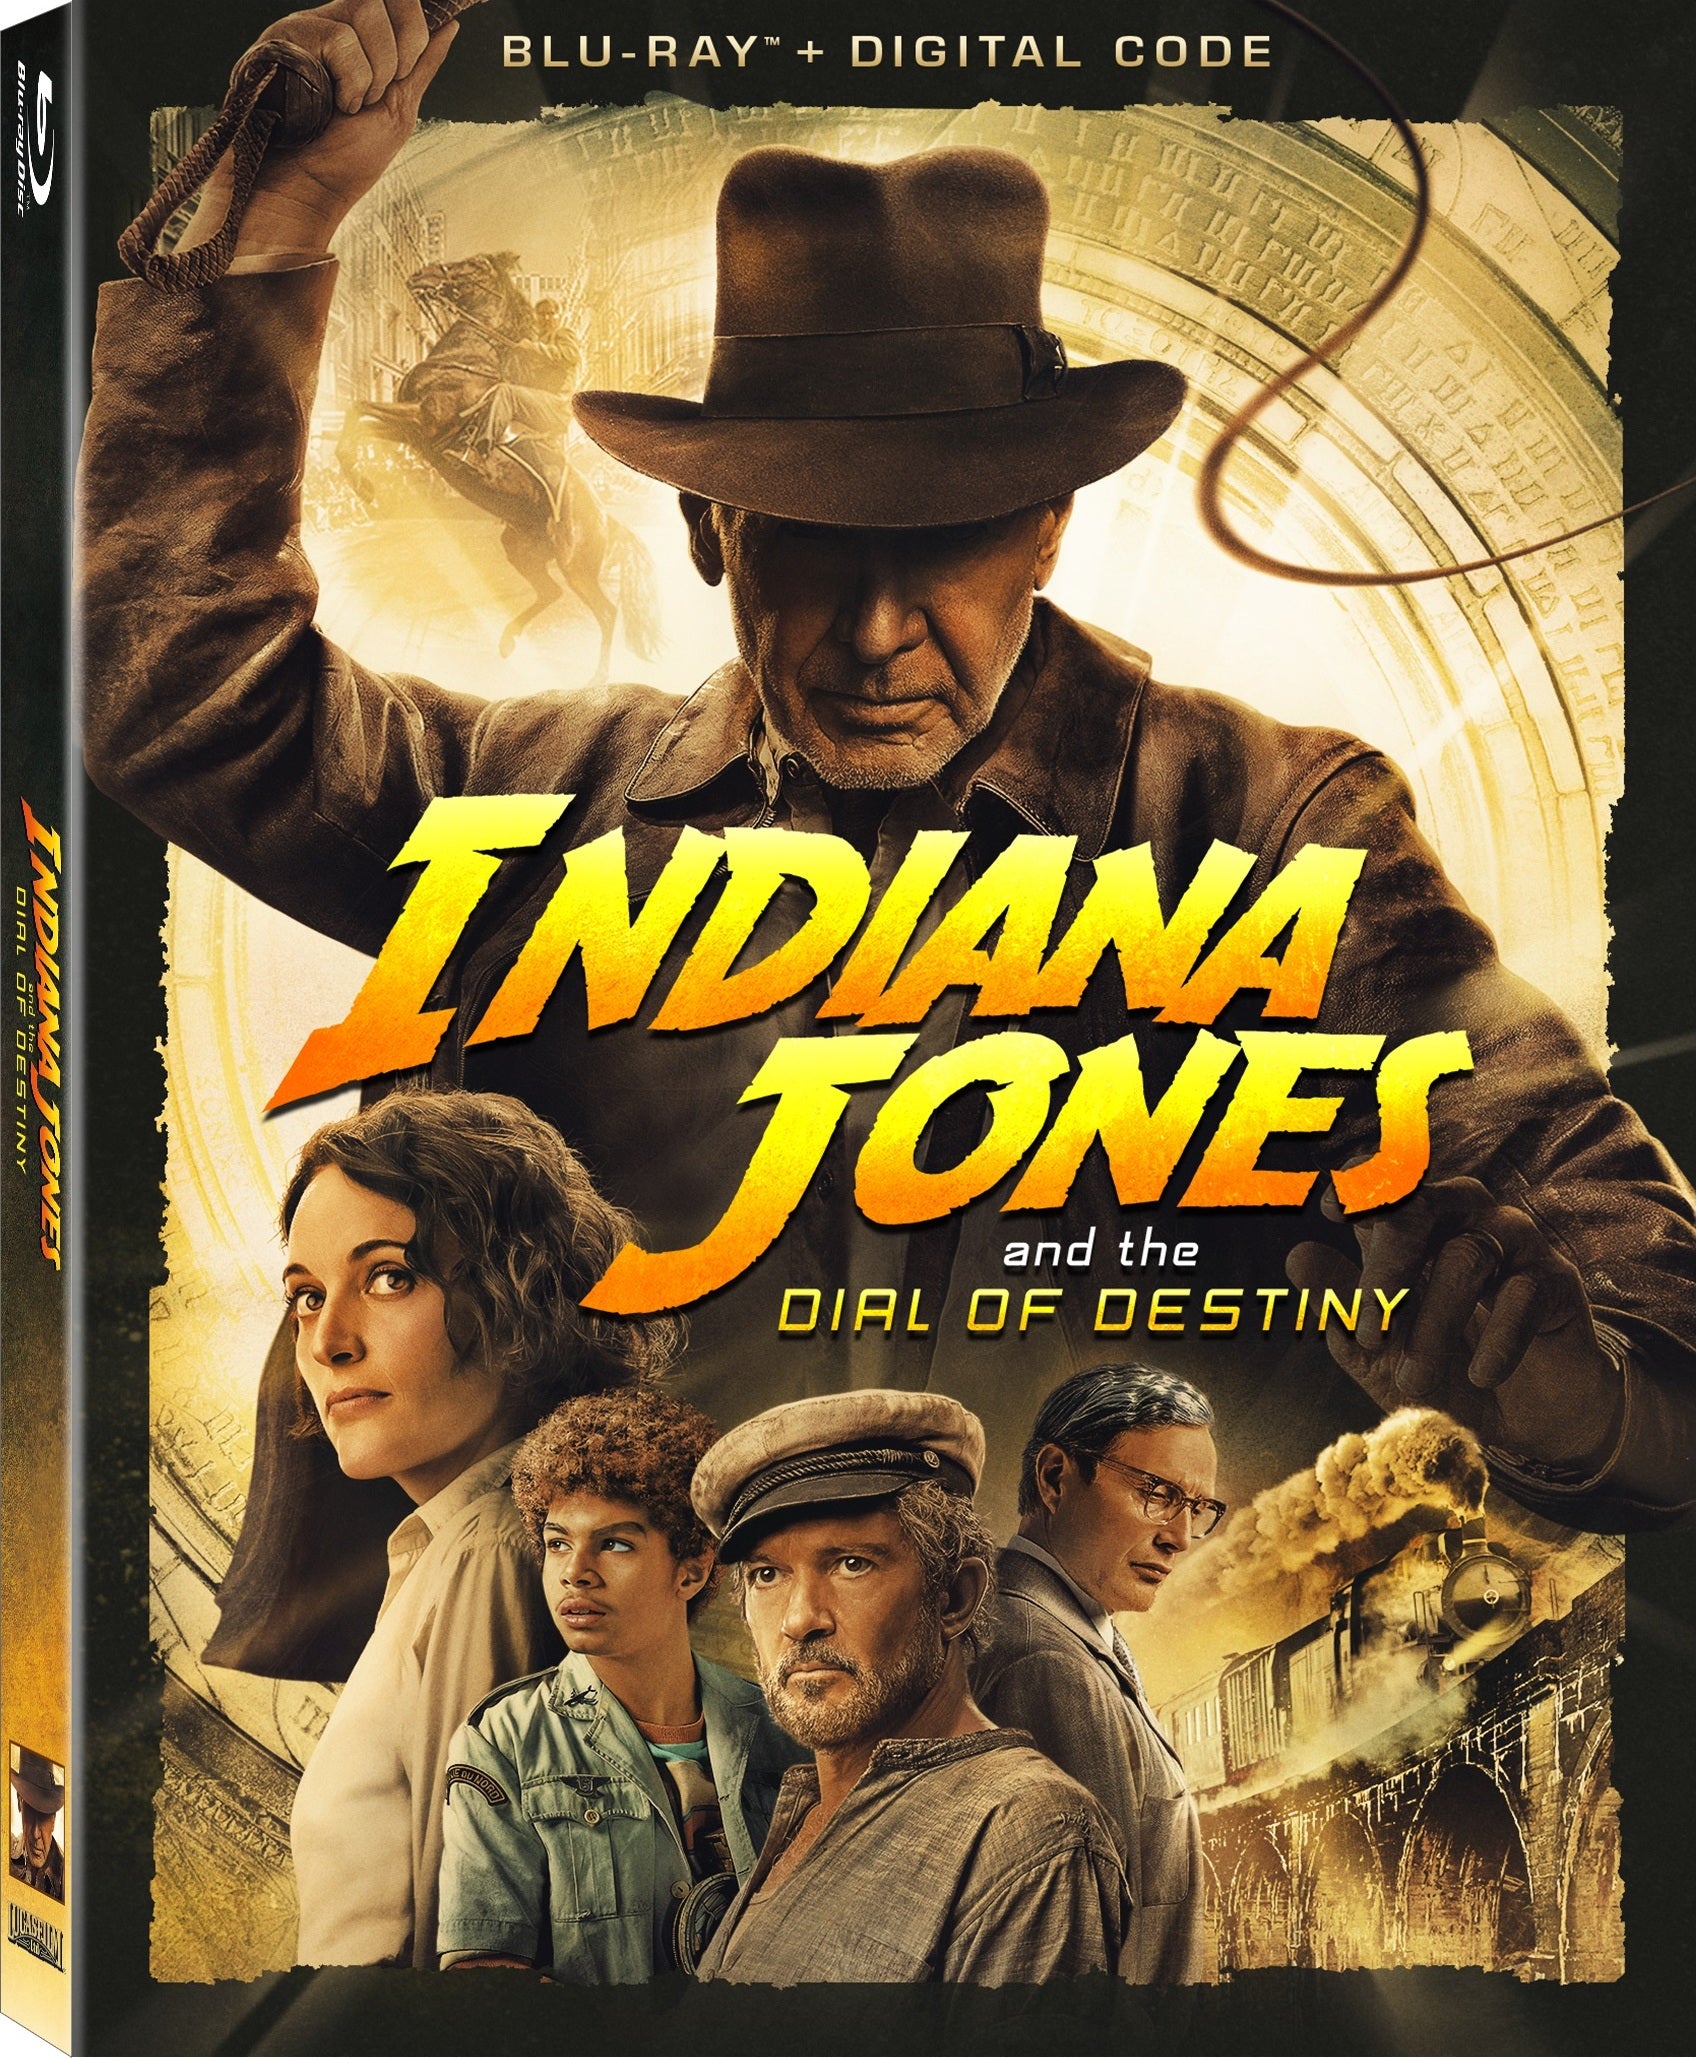 Who does Antonio Banderas play in Indiana Jones and the Dial of Destiny?